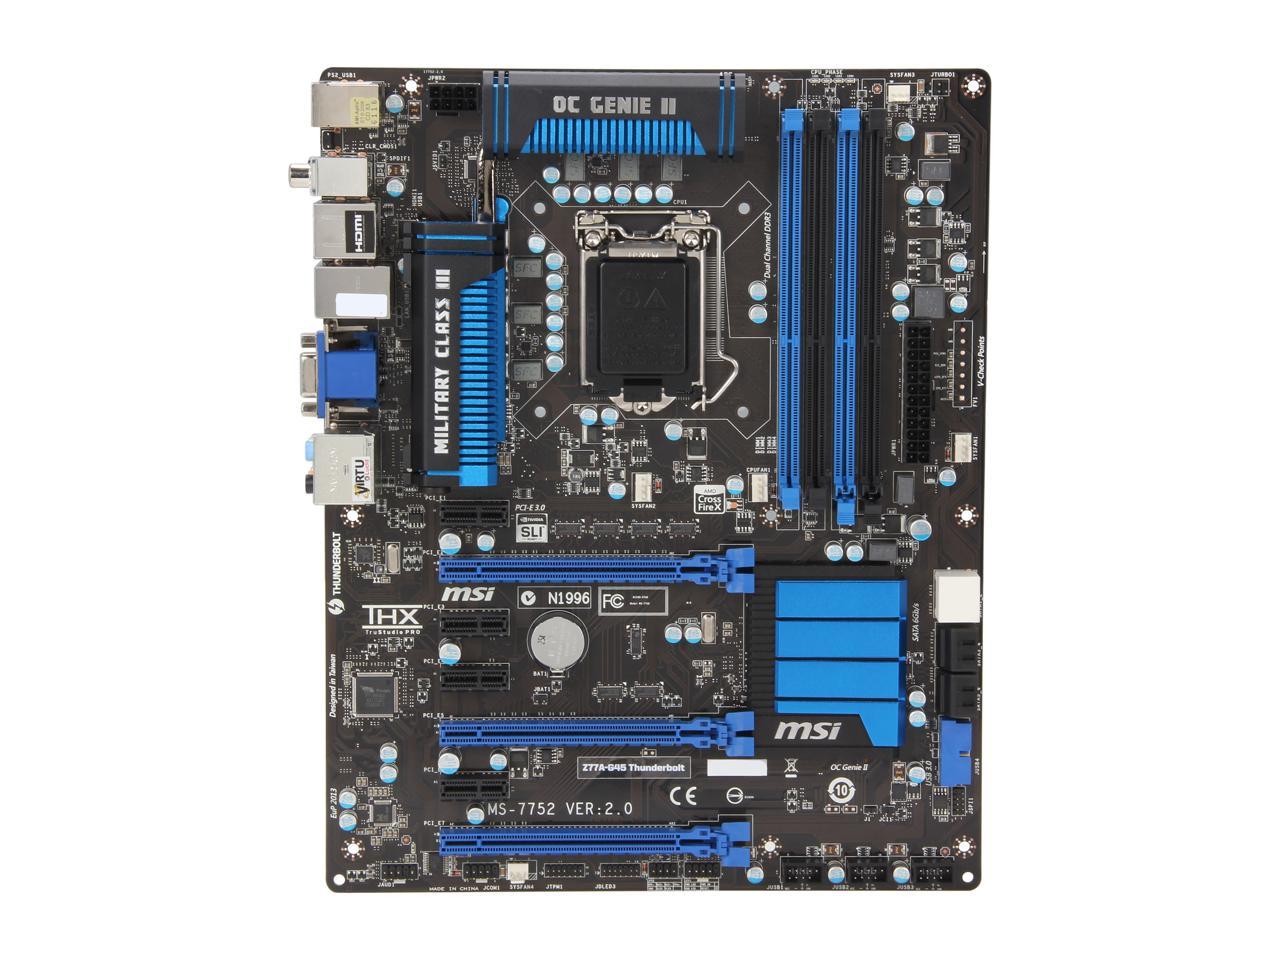 MSI Z77A-G45 Thunderbolt Motherboard Review - PC Perspective